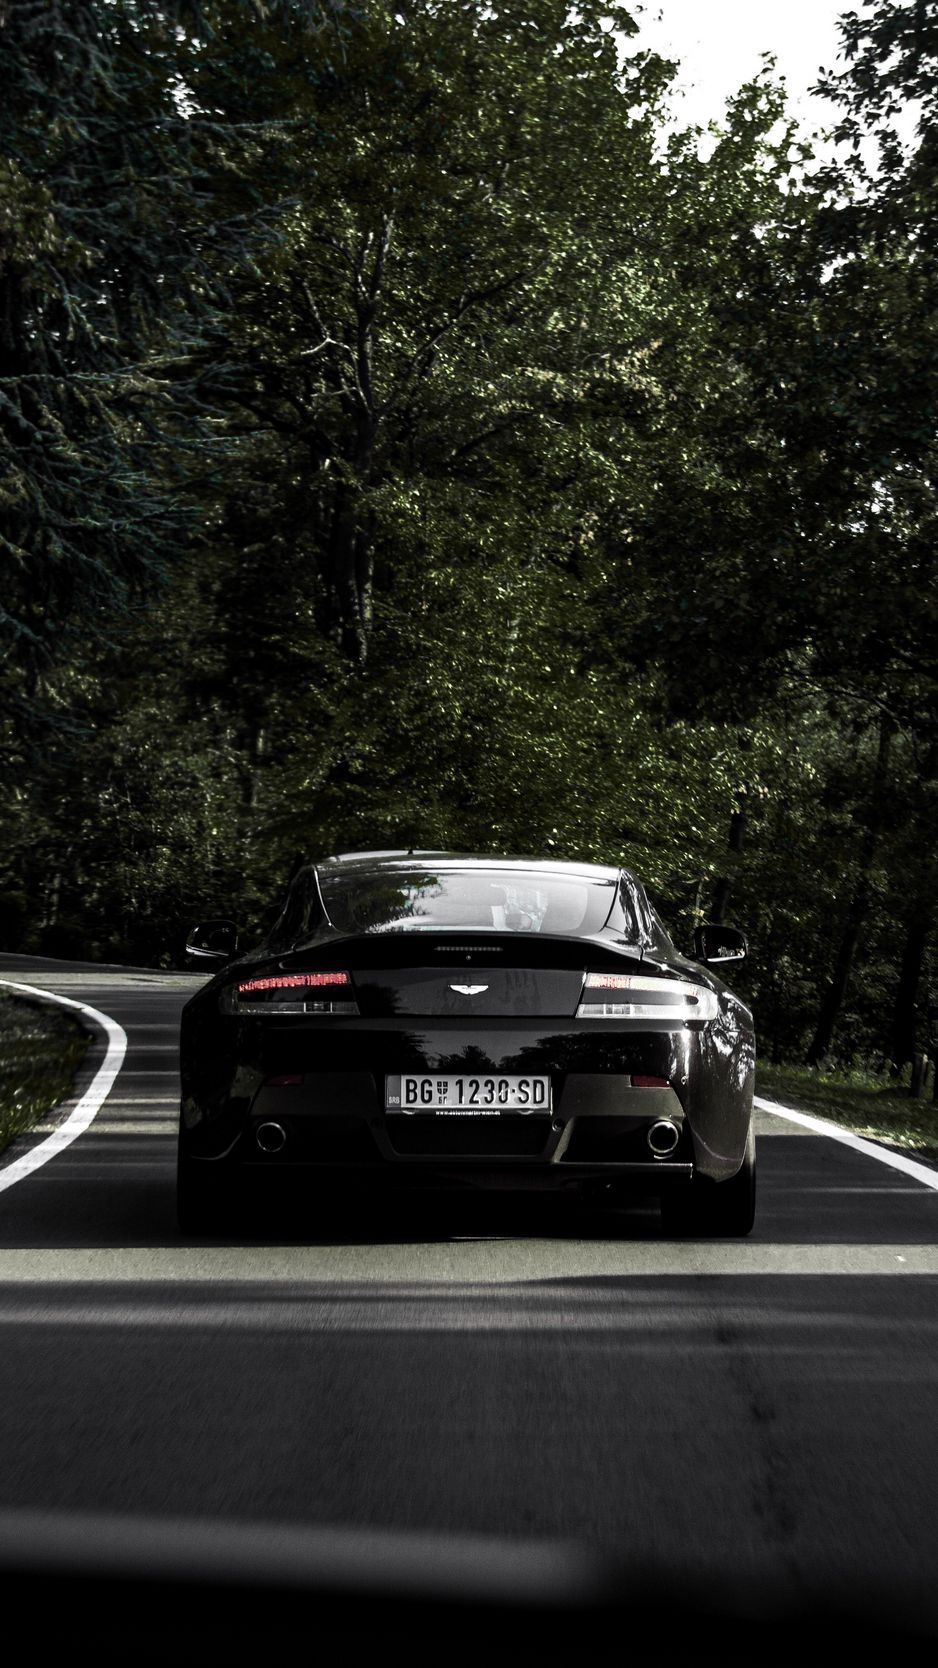 Download Wallpaper 938x1668 Aston Martin Car Black Road Iphone 8 7 6s 6 For Parallax Hd Background